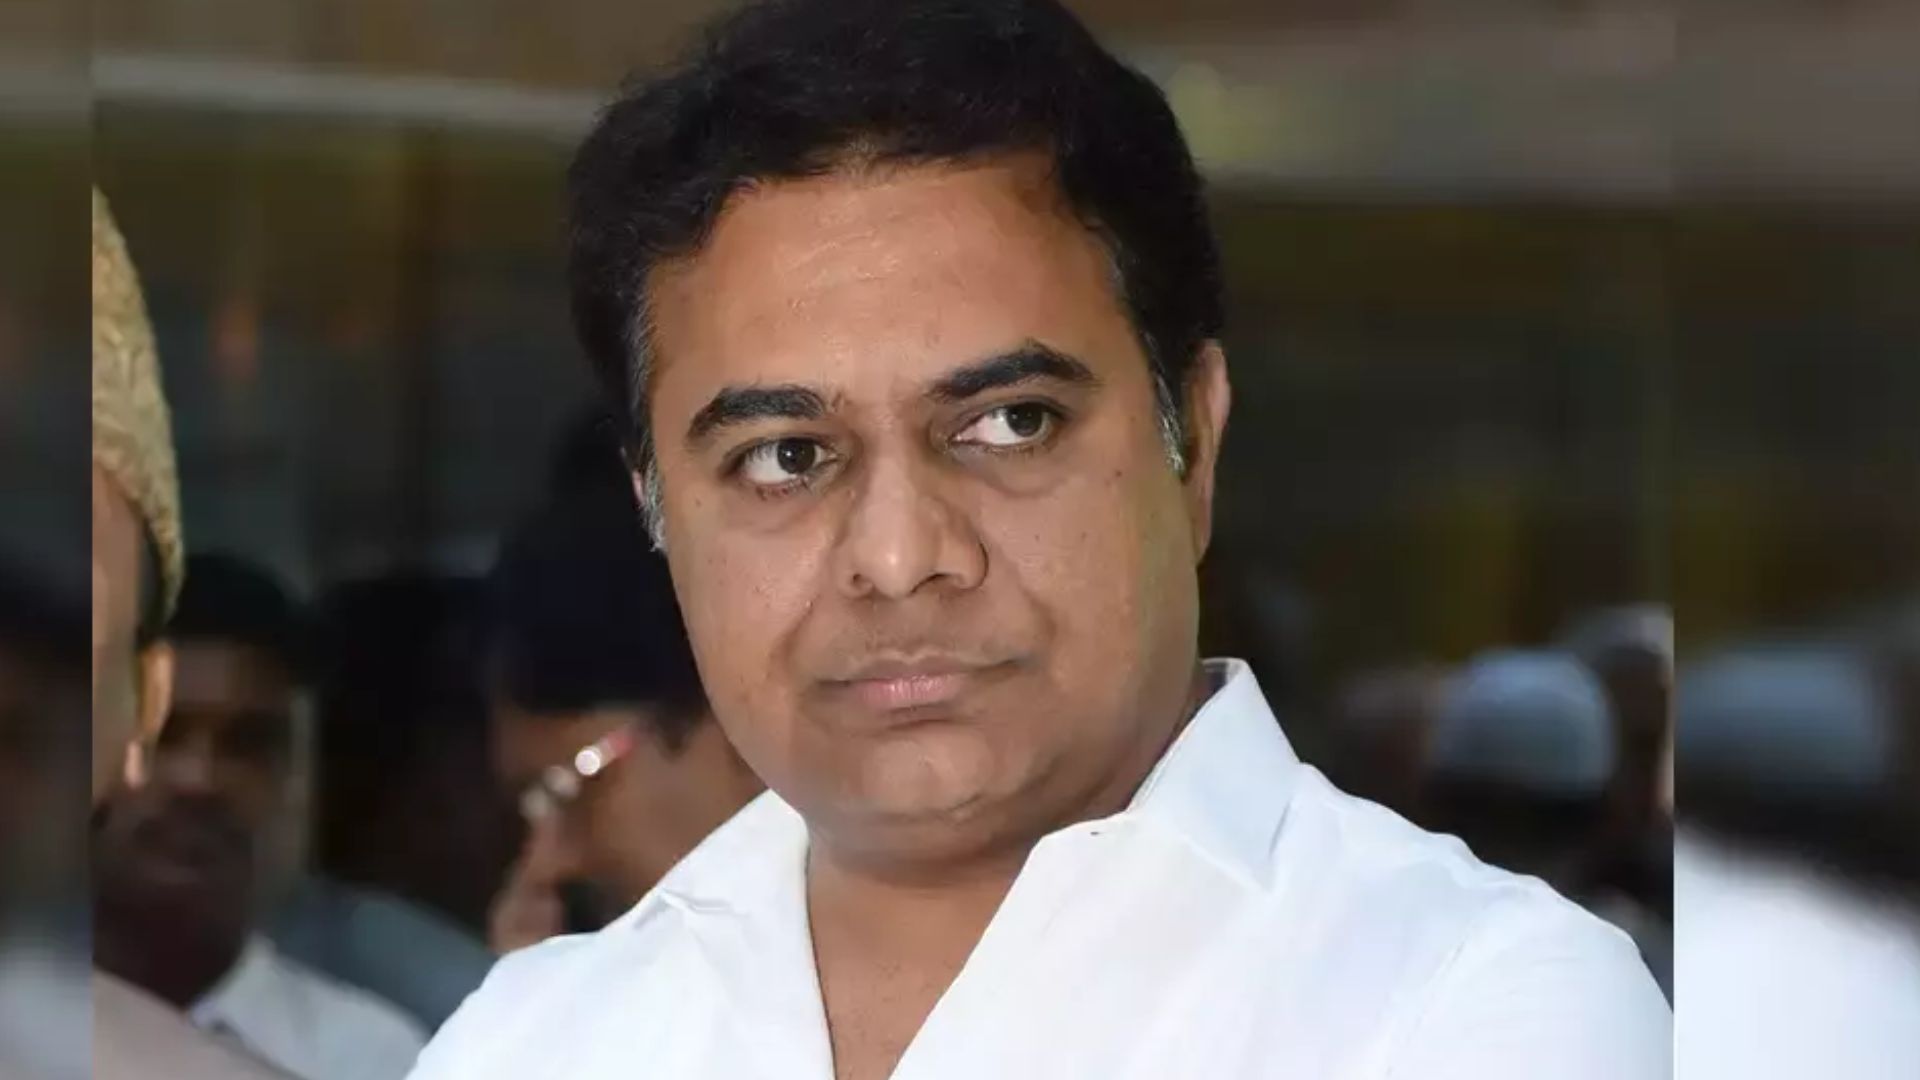 Telangana Minister KT Rama Rao on exit poll results: “Exact polls will give us good news”